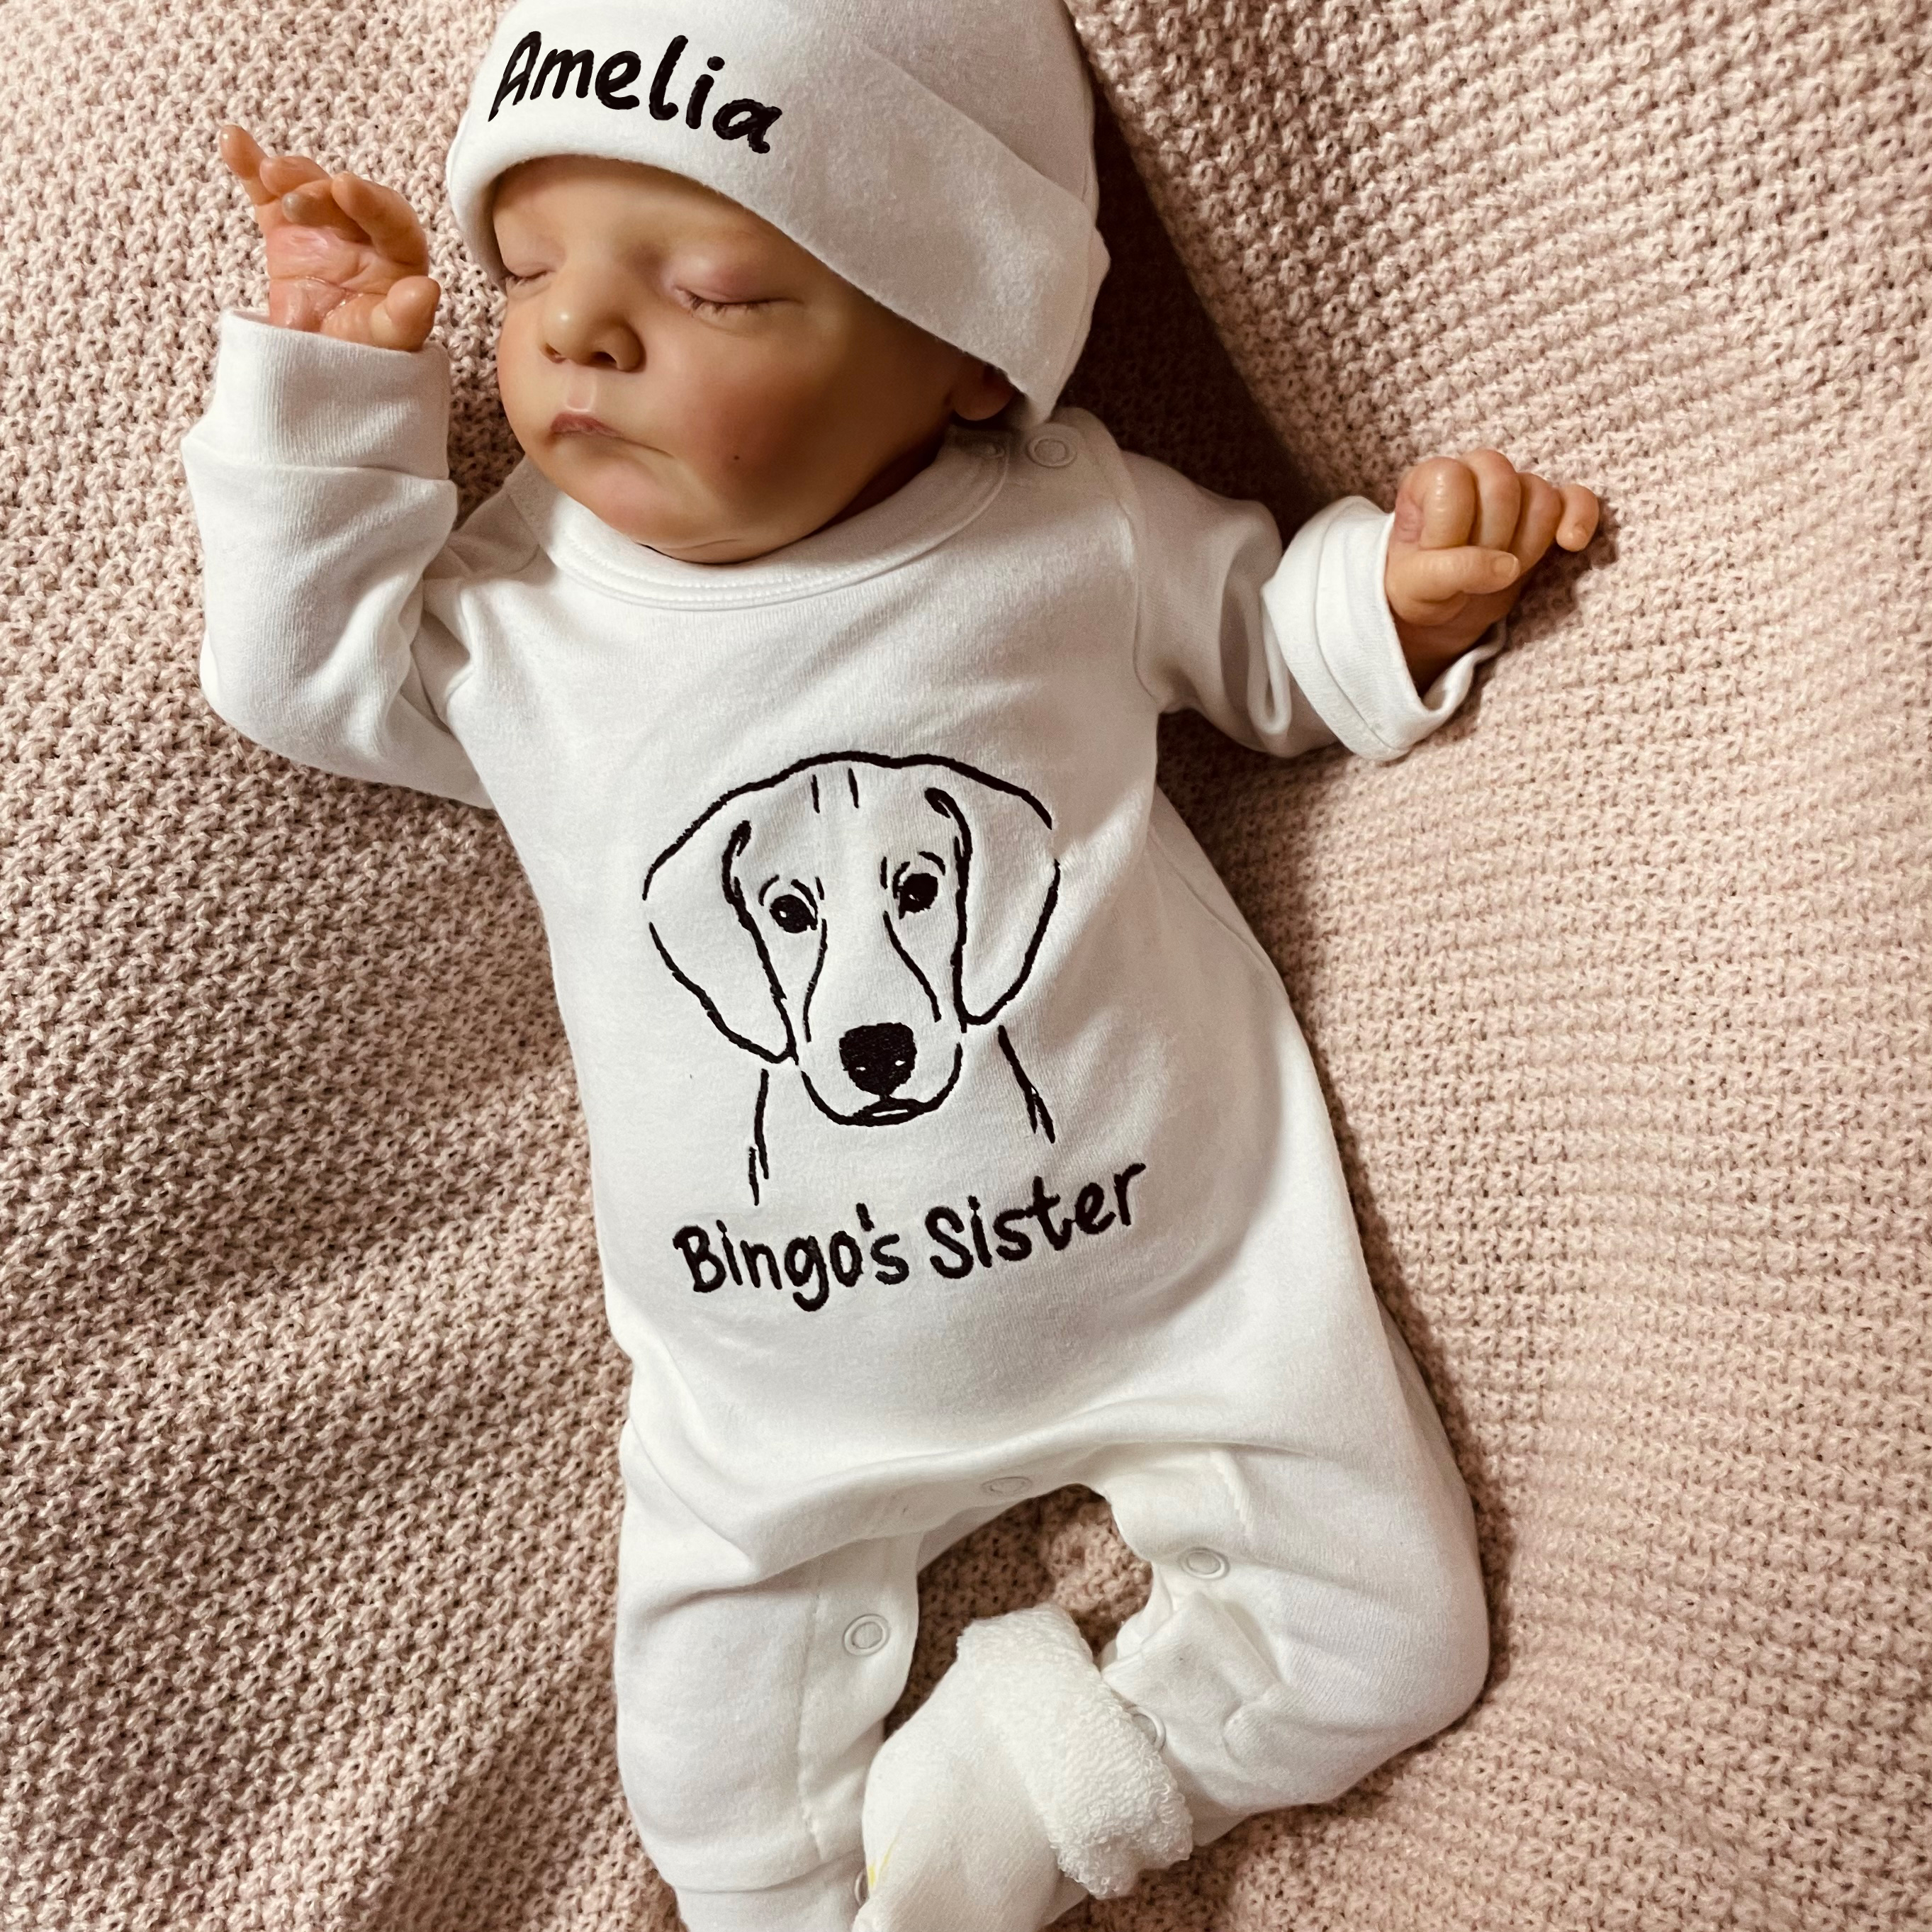 Personalized Baby Embroidery Rompers Sets (Pets)